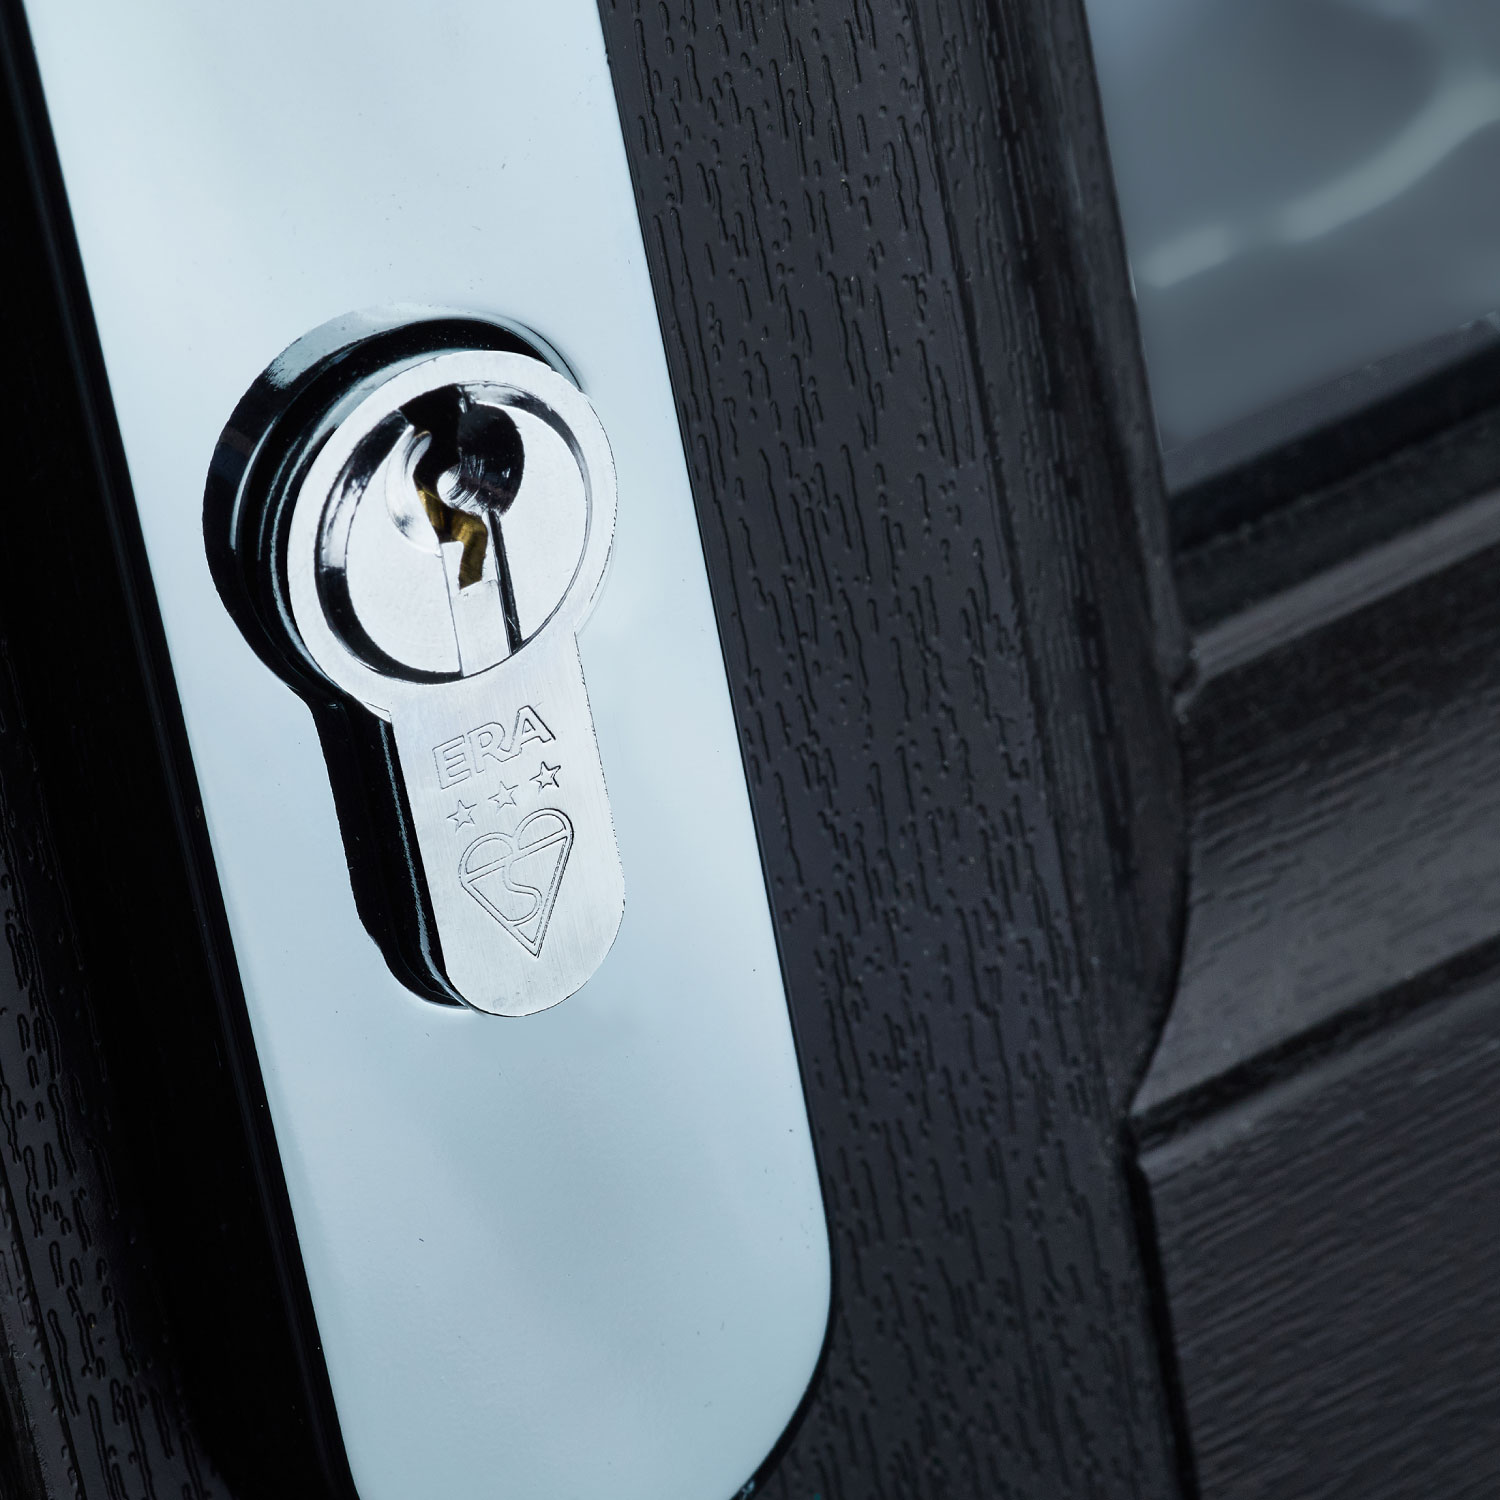 Sarah Knight, explores how door manufacturers can meet the dhf’s latest technical standards, whilst simultaneously reflecting current design trends, by specifying certified suites of hardware.